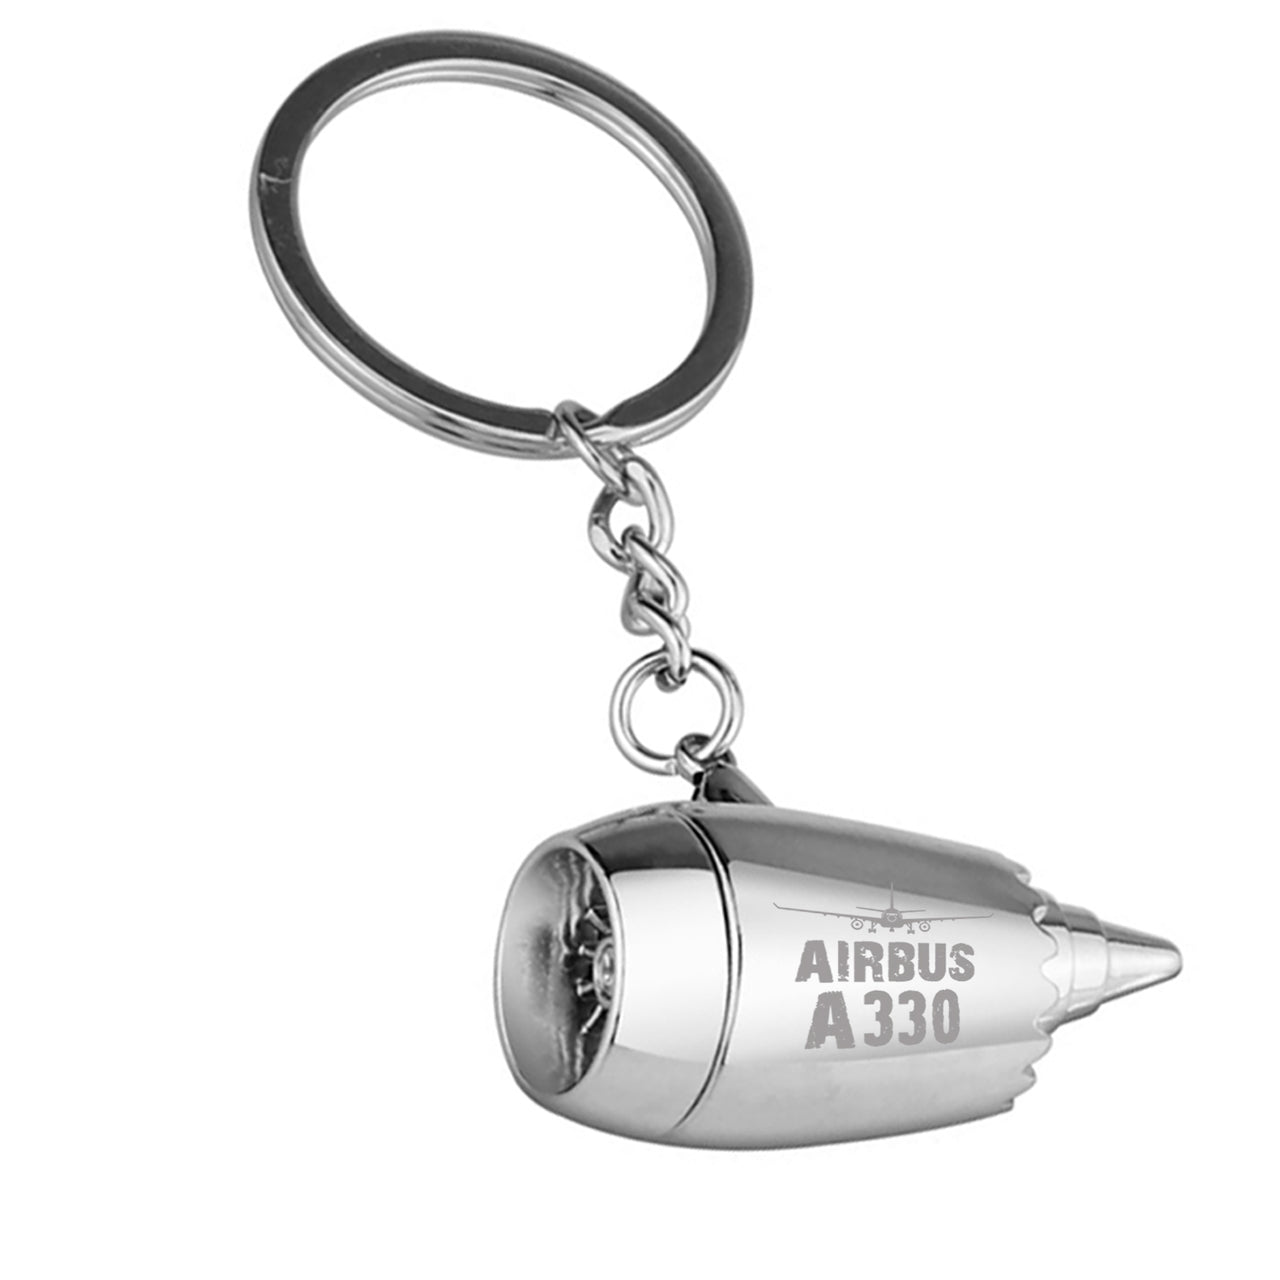 Airbus A330 & Plane Designed Airplane Jet Engine Shaped Key Chain